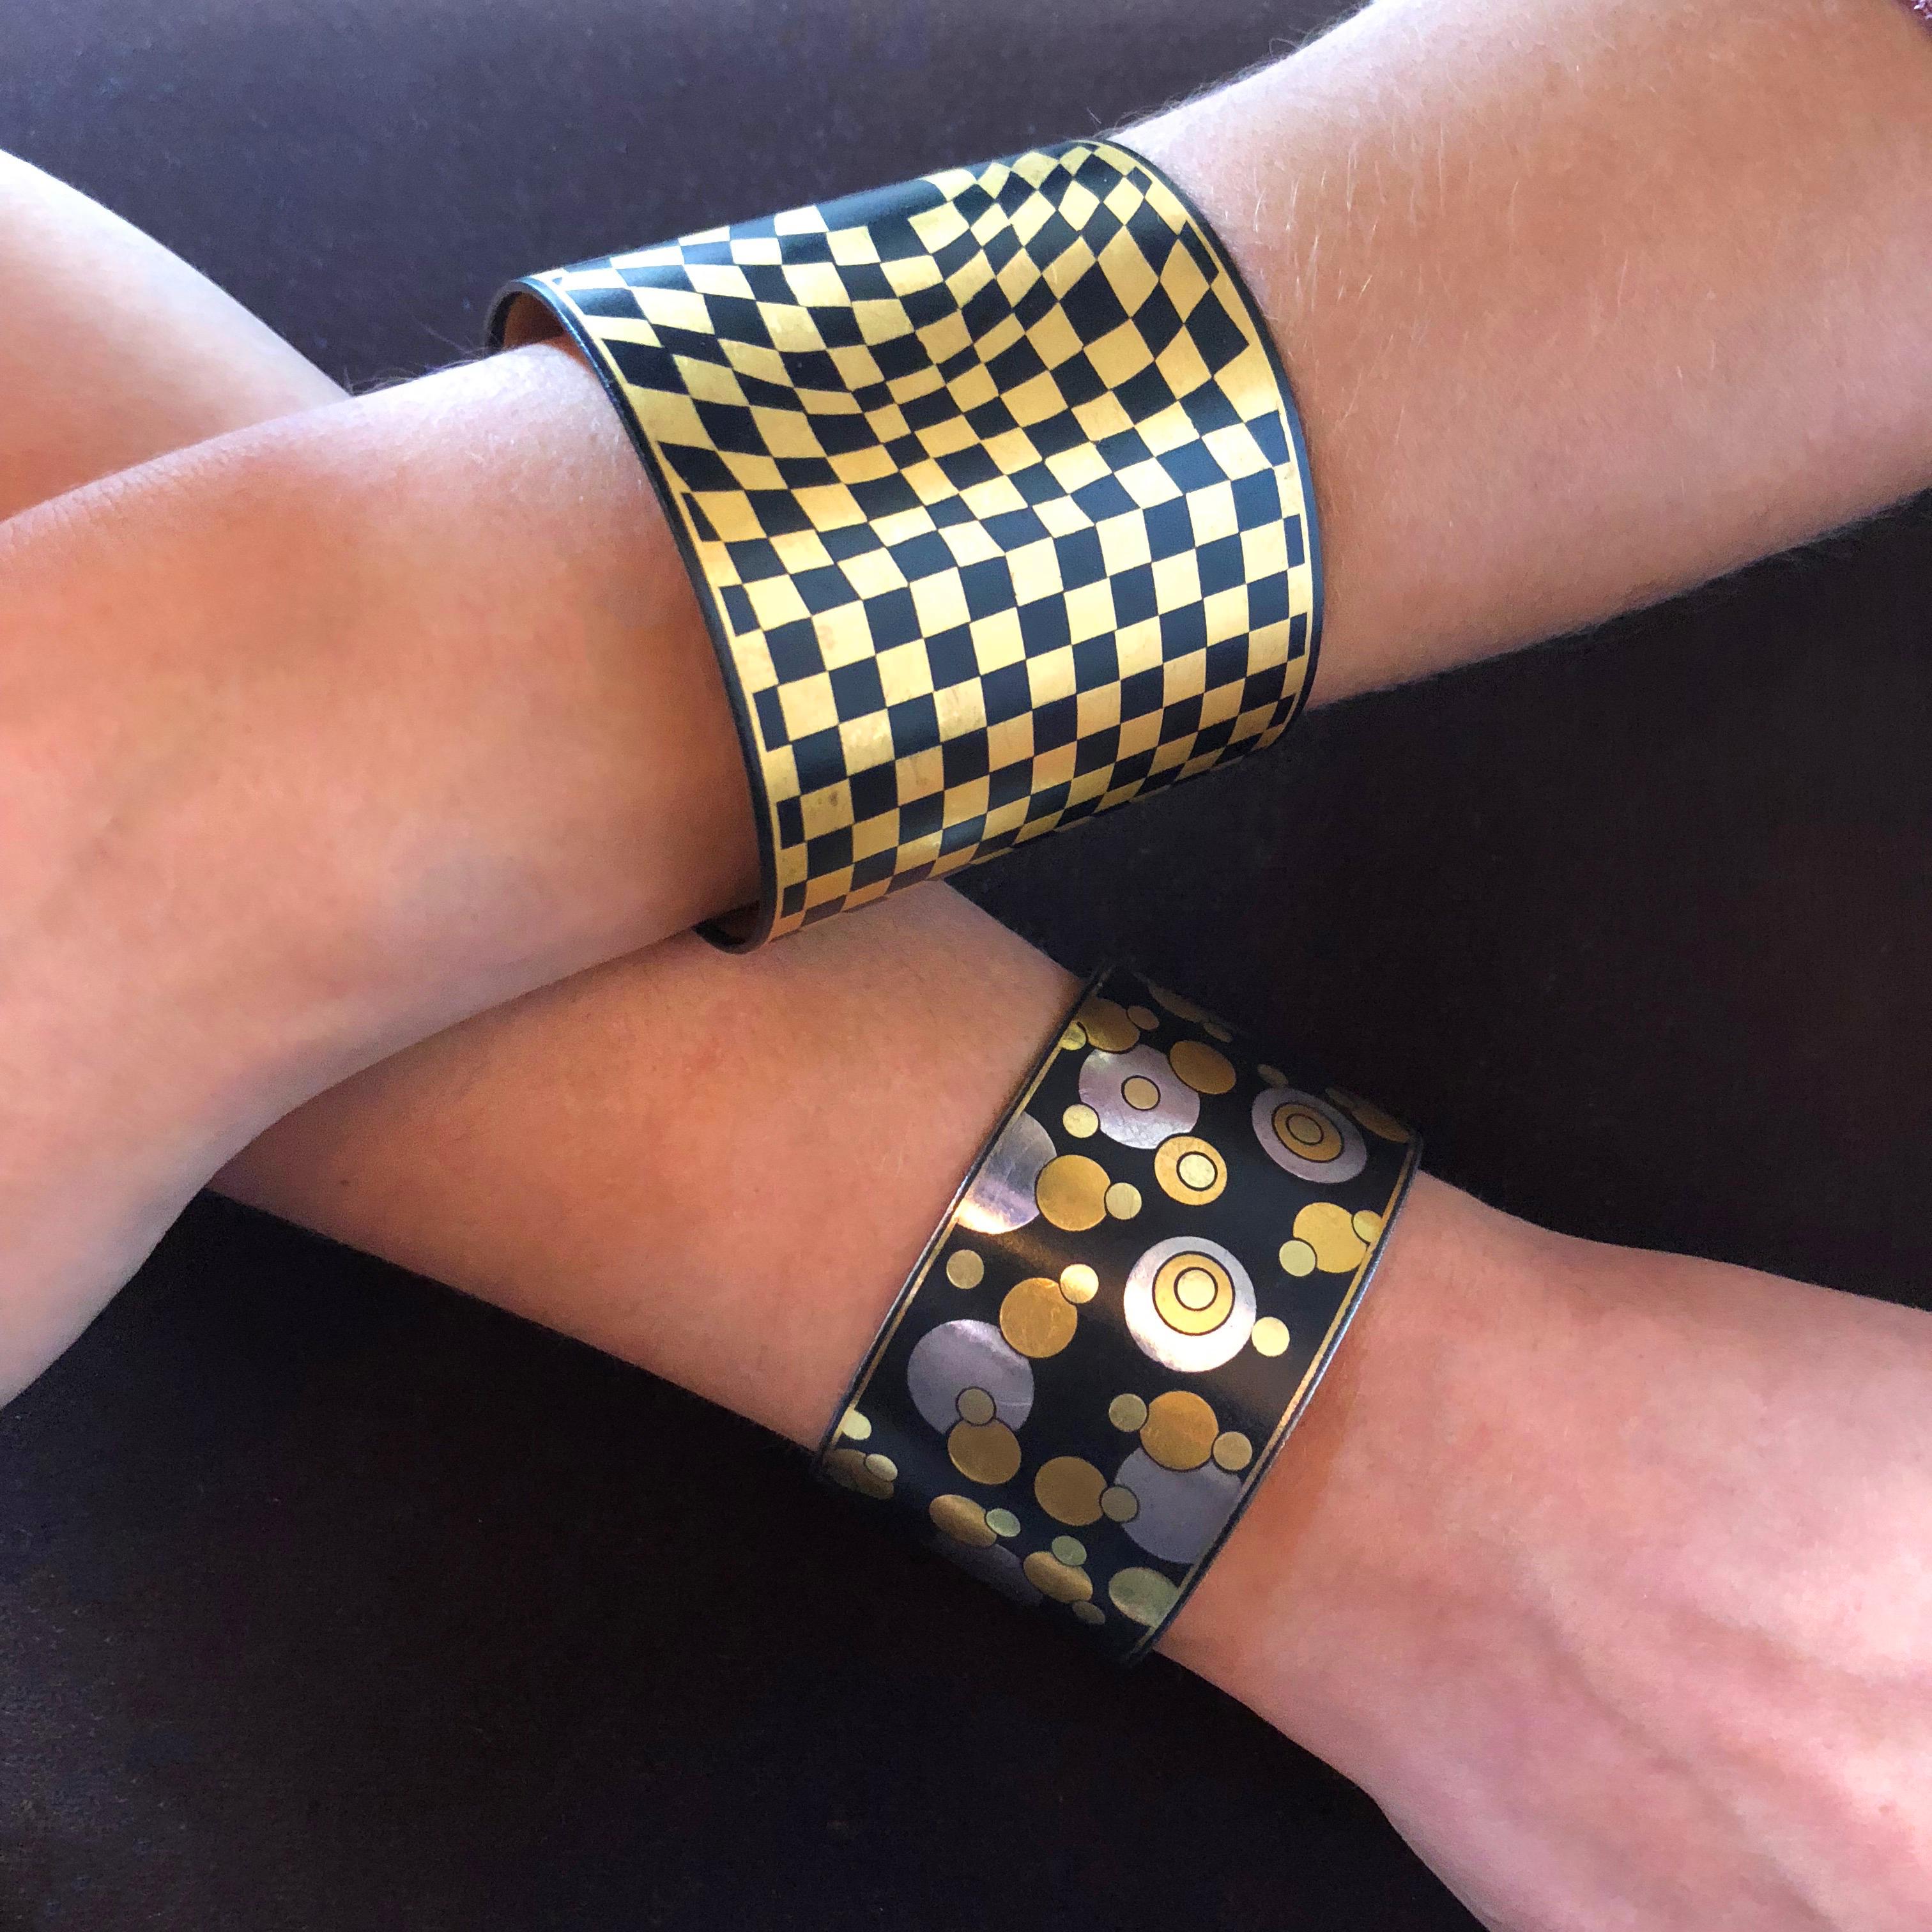 An iconic black iron lacquer cuff inlaid with high karat yellow gold and sterling silver. The  Bubble cuff is by the gifted designer Angela Cummings for Tiffany & Co., c. 1980

The cuff measures 5.5